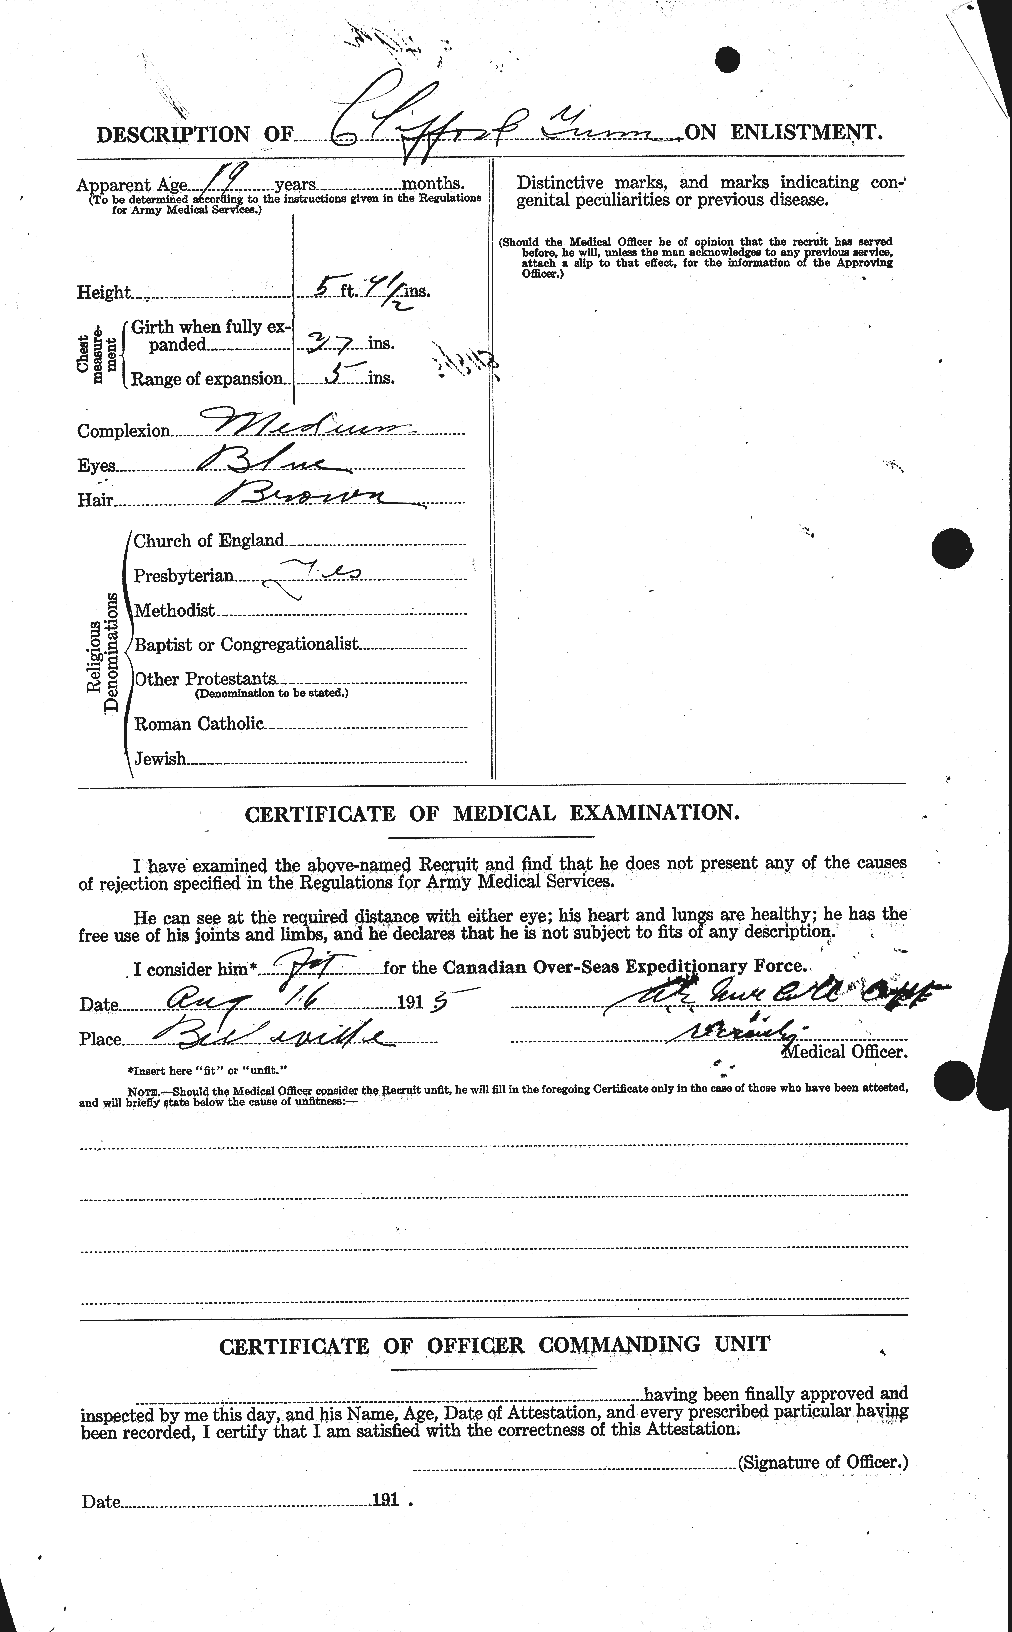 Personnel Records of the First World War - CEF 368011b